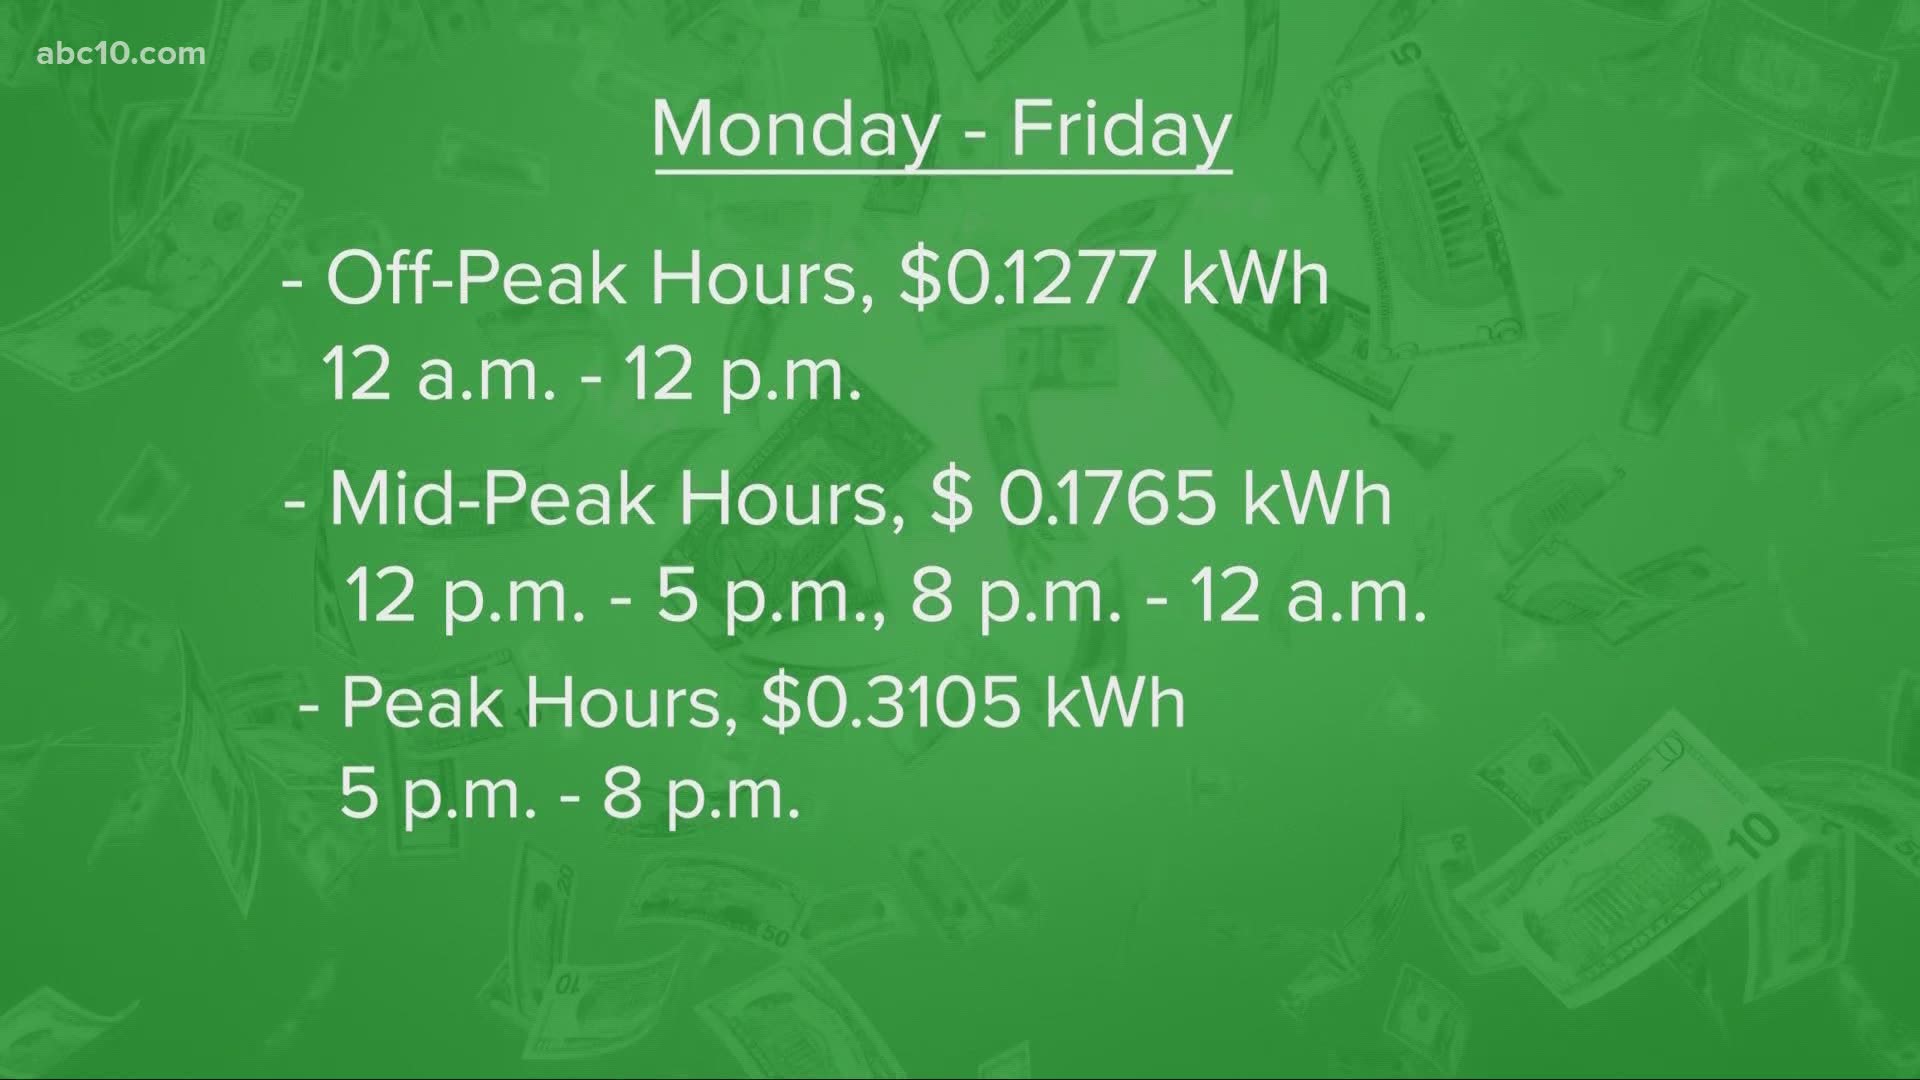 Your electricity rate may be higher with peak times.